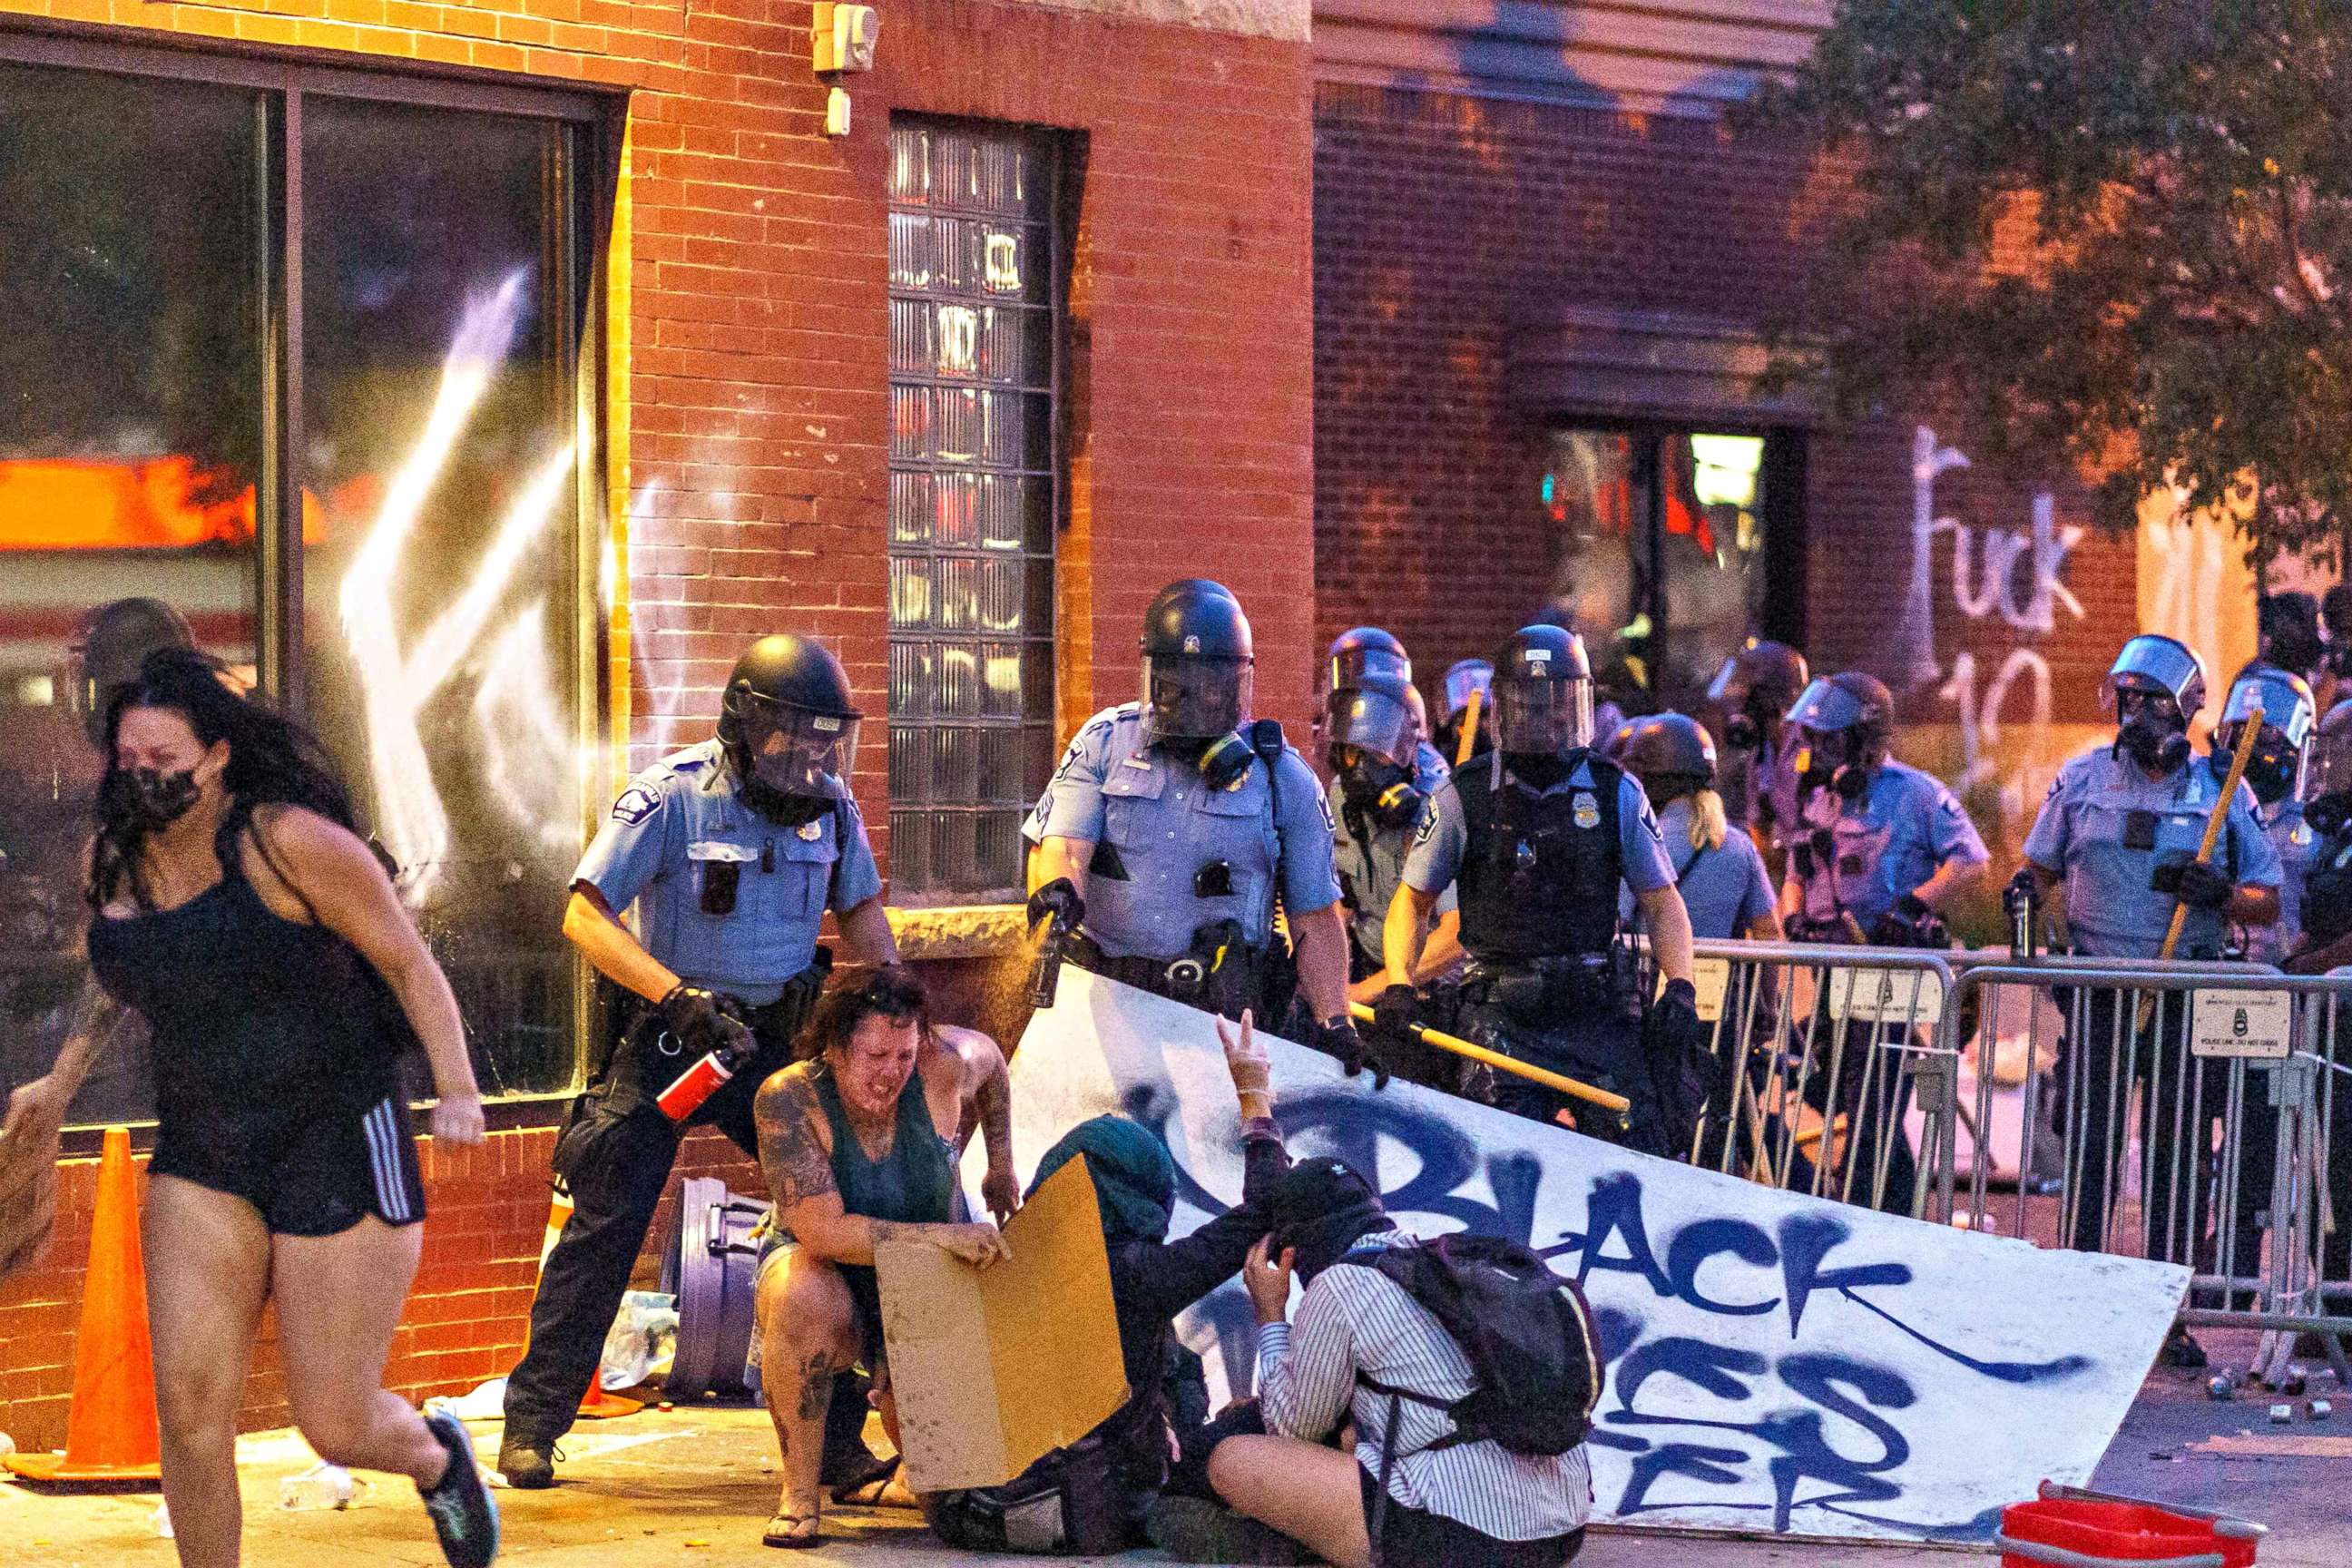 PHOTO: Police use pepper spray on protesters during a demonstration outside the Third Police Precinct over the death of George Floyd, May 27, 2020 in Minneapolis.